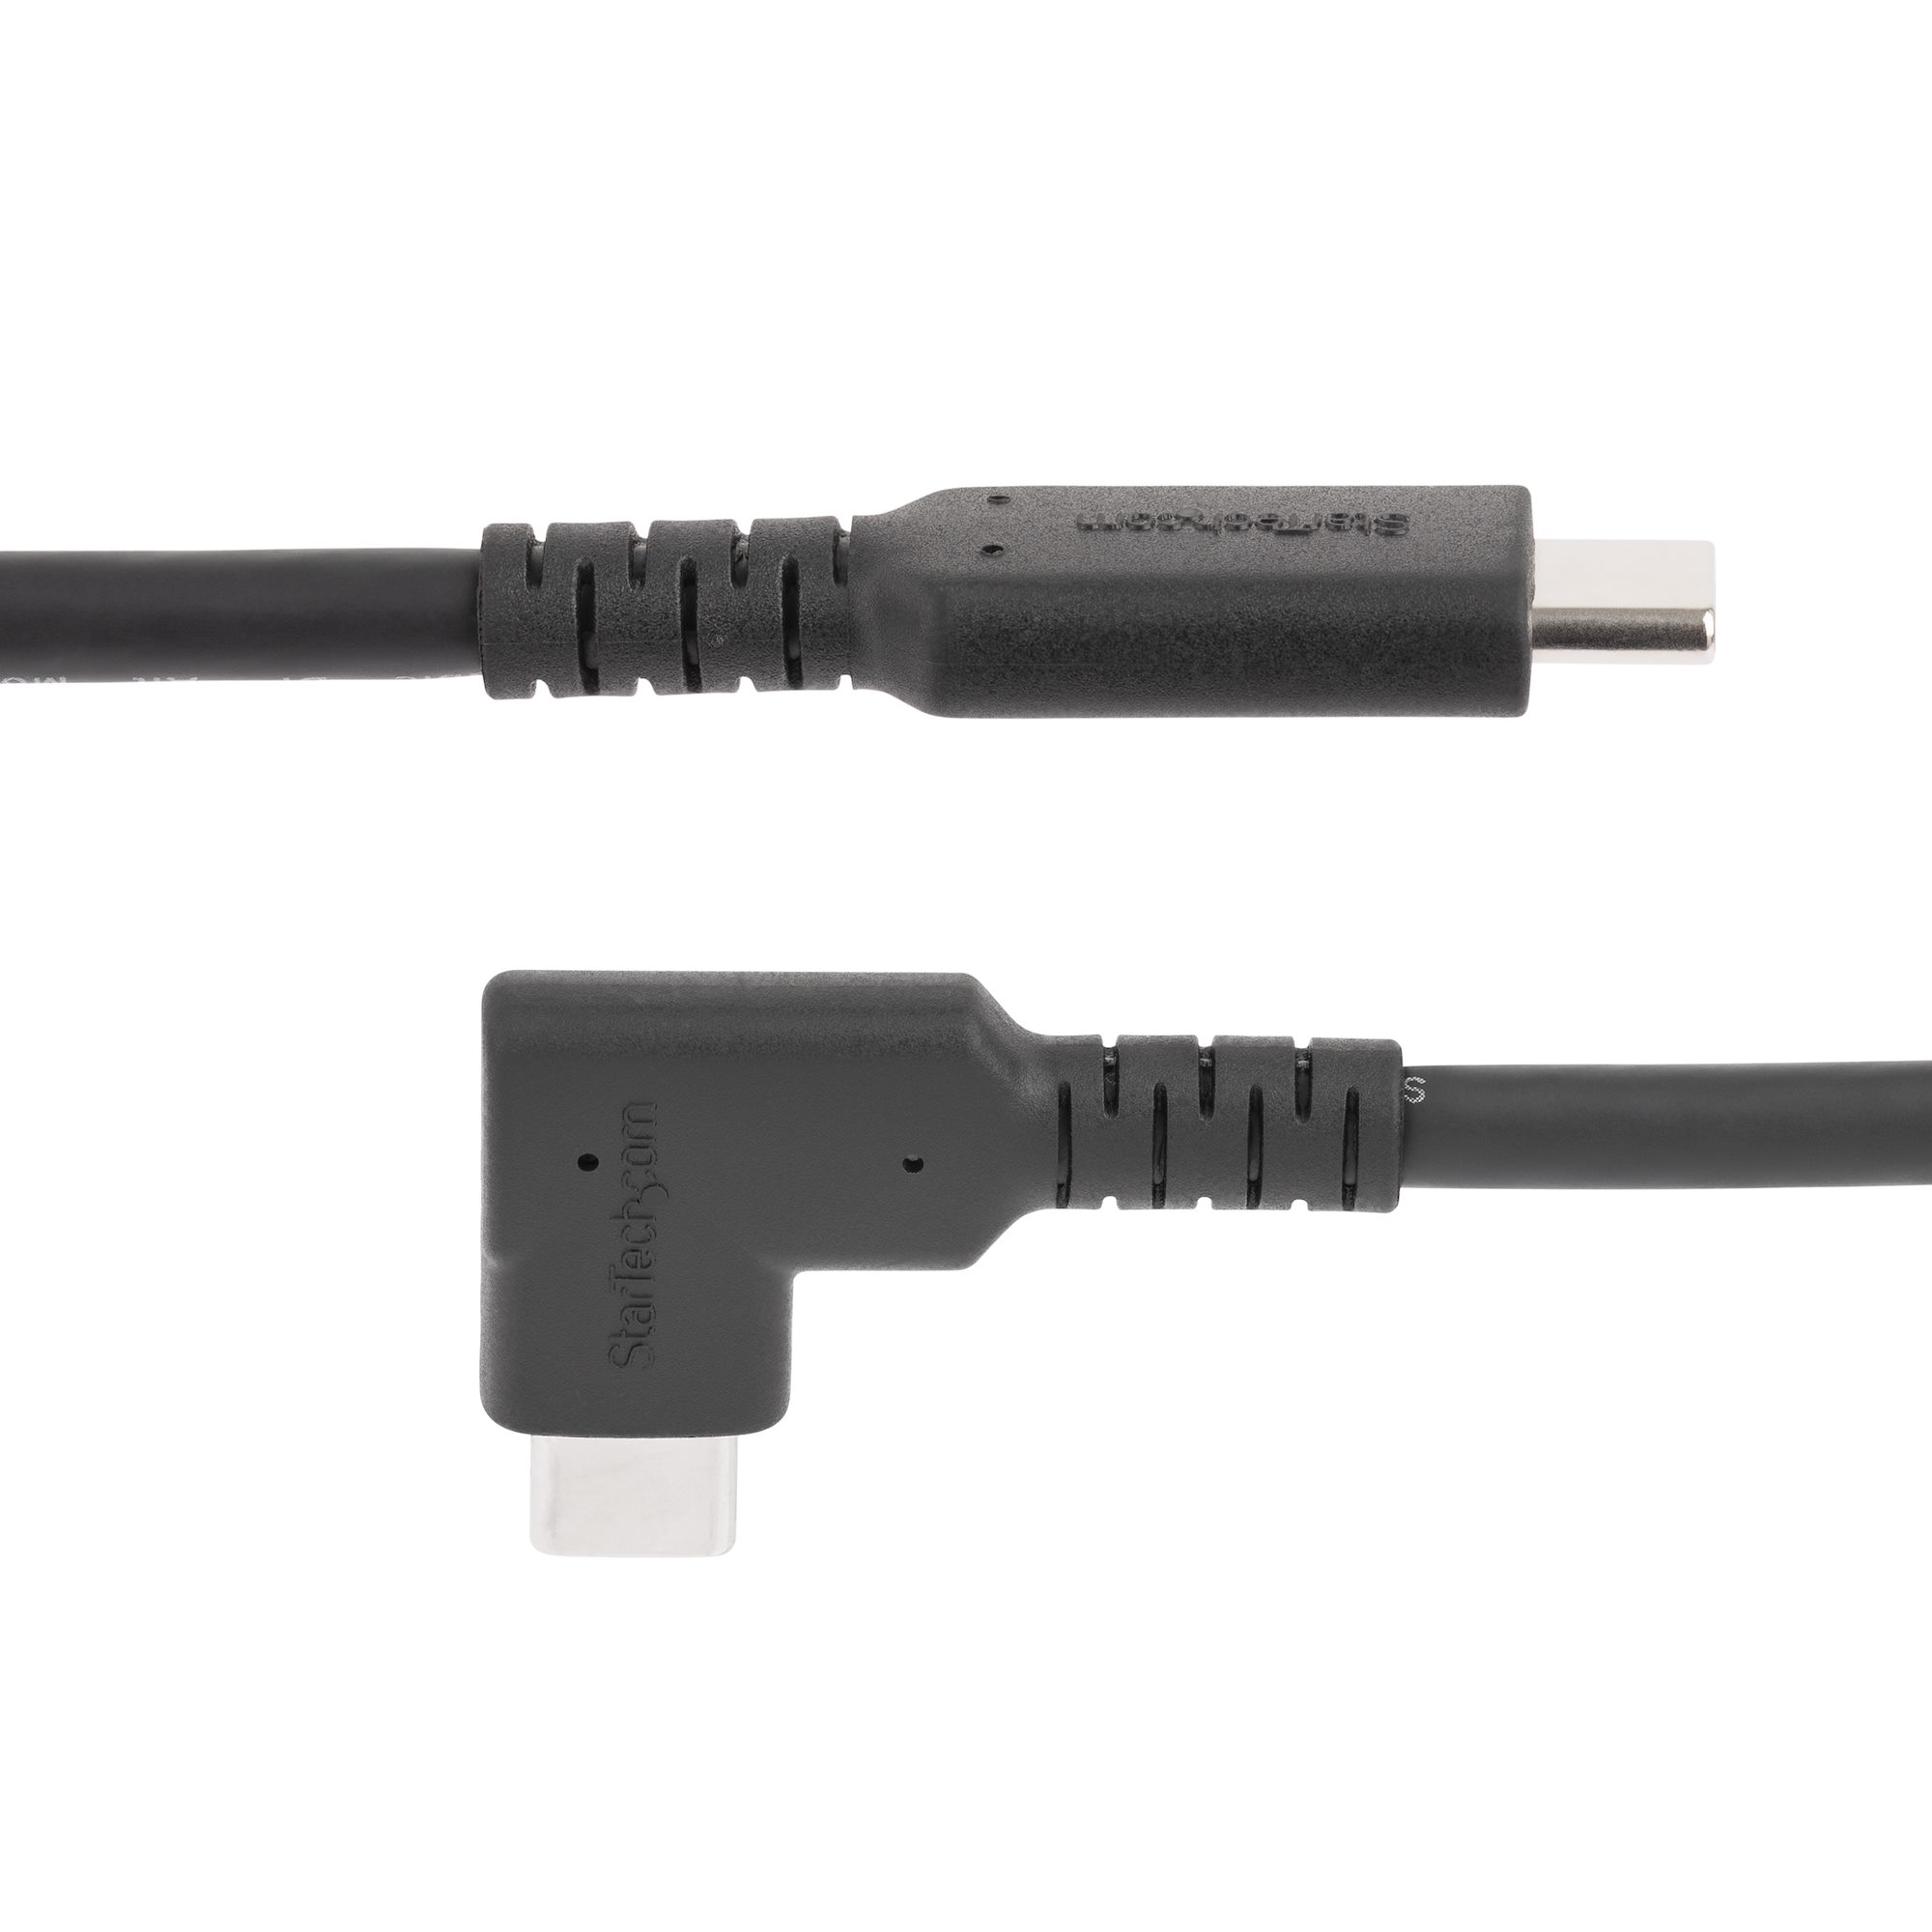 Full-Featured USB-C 100W PD Fast Charging Cable with 4K@60Hz and 5Gbps